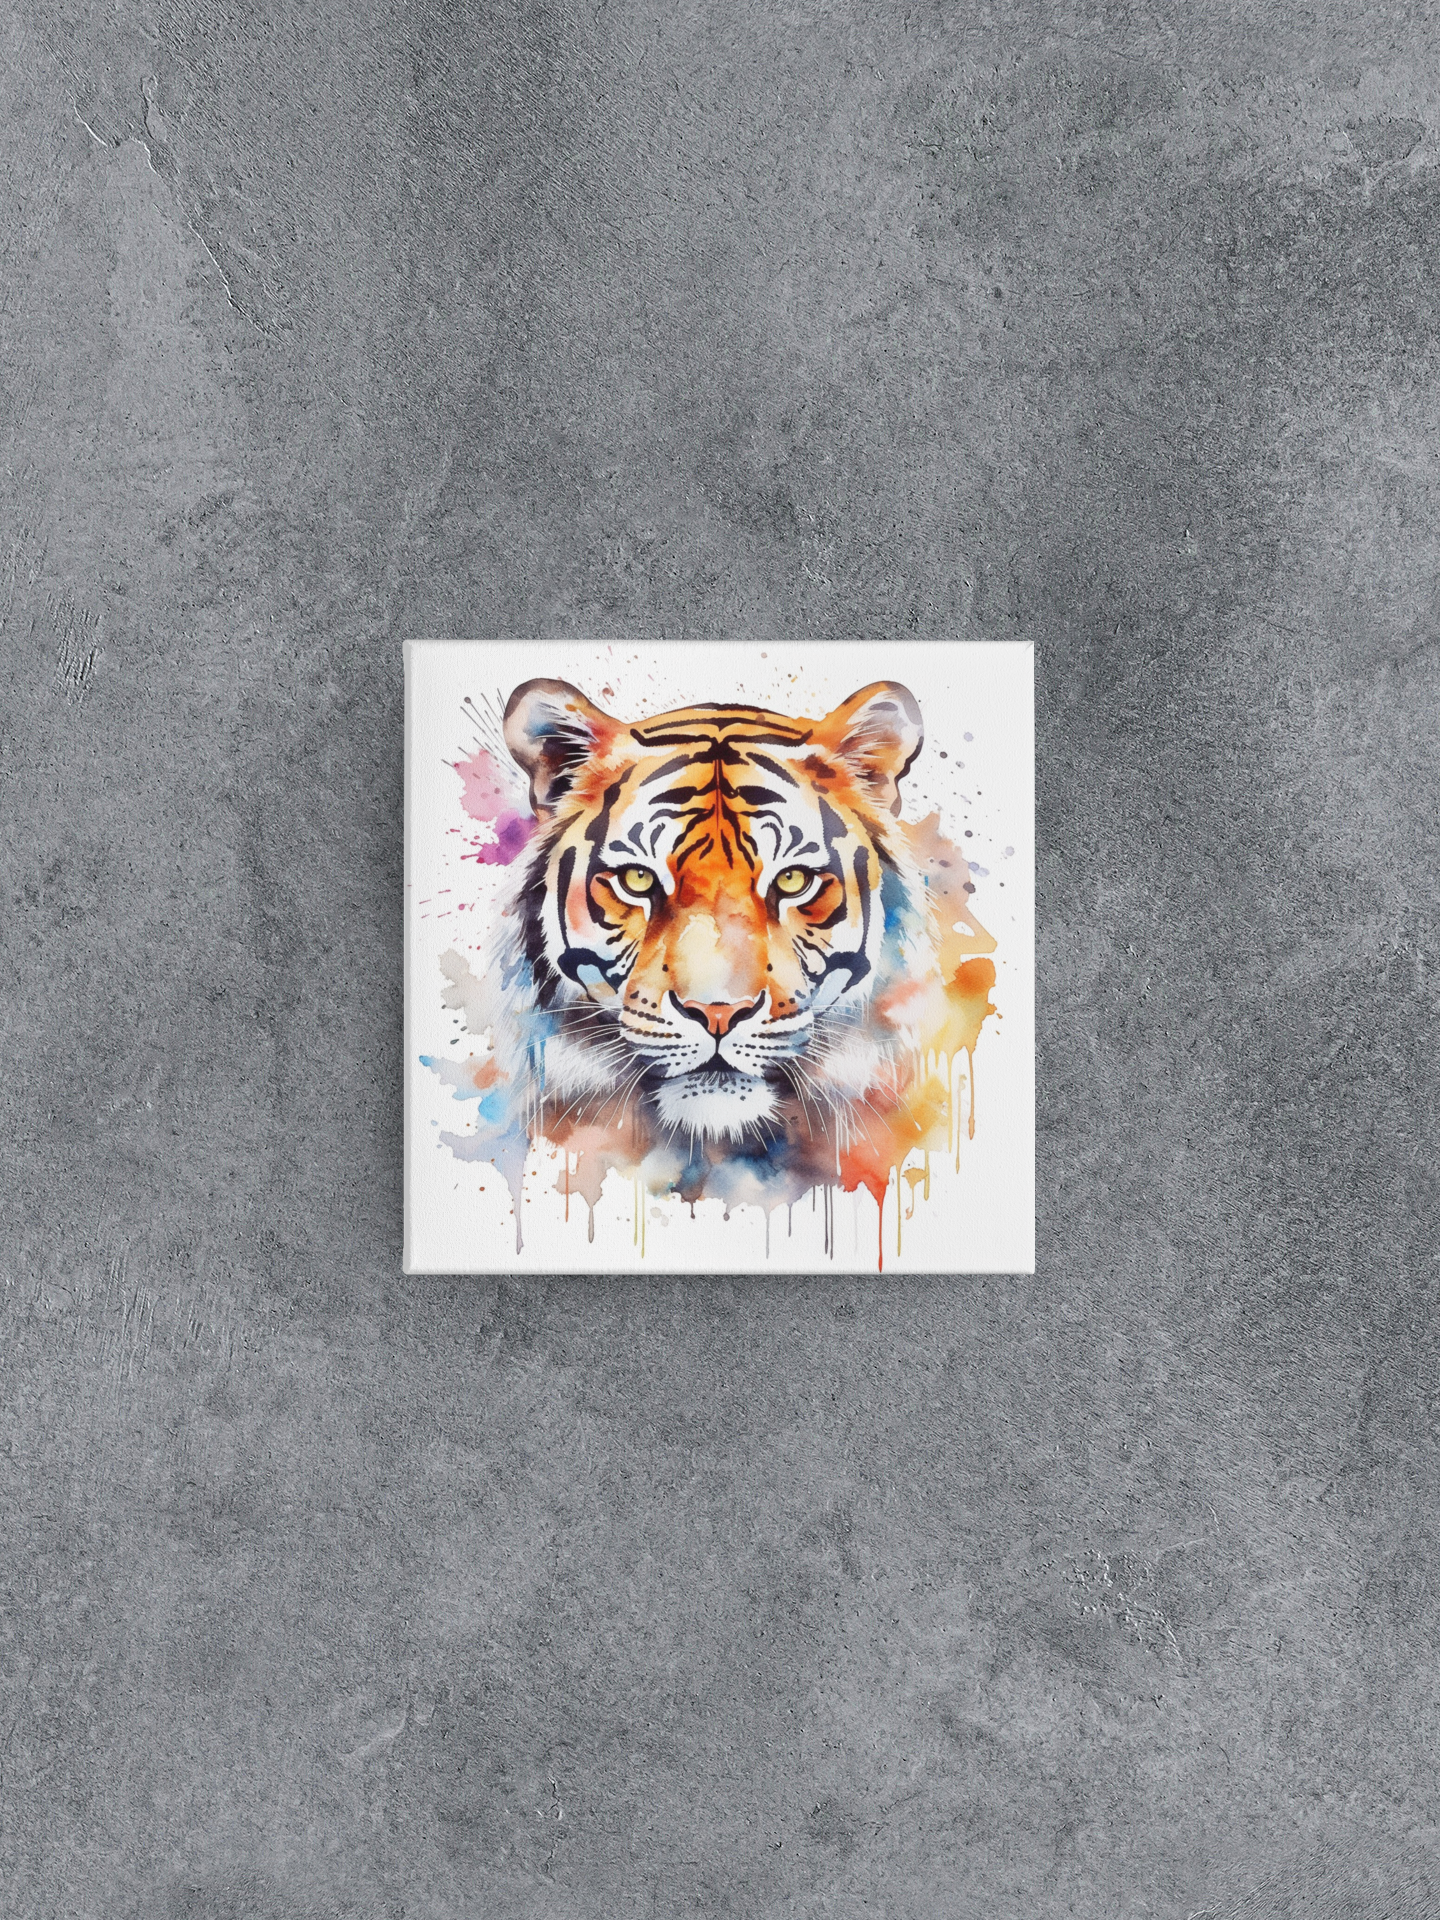 Tiger Canvas Wall Art, Majestic Tiger Watercolor Painting, Nature Canvas Art, Animal Canvas Print, Ready to Hang